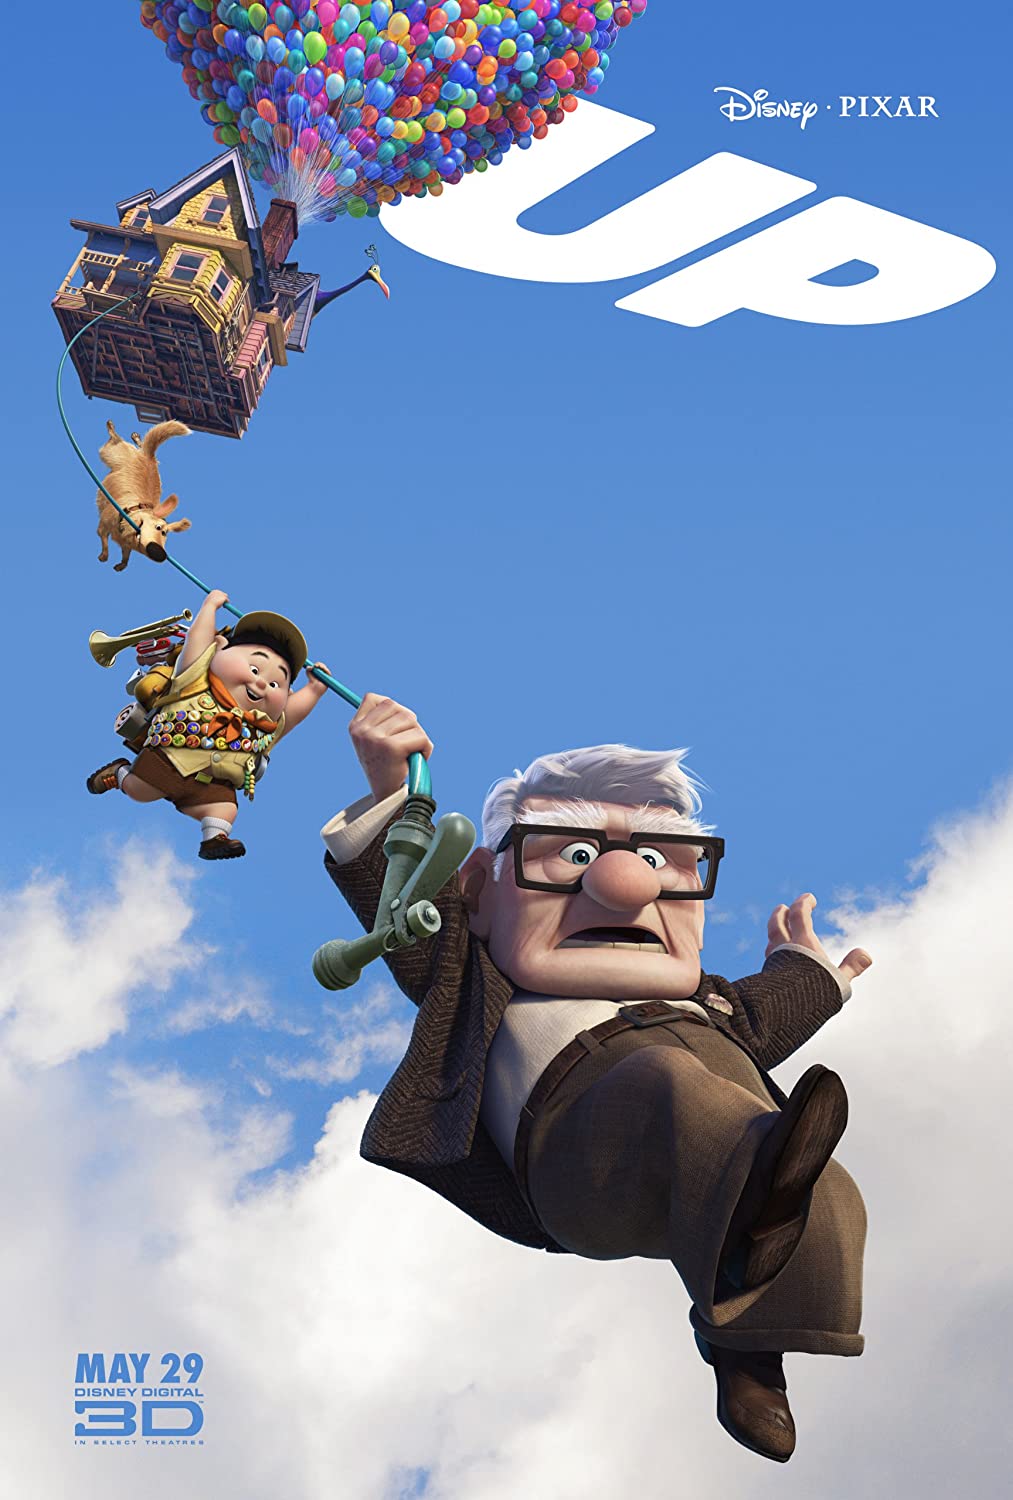 You are currently viewing Notes On A Film: Up